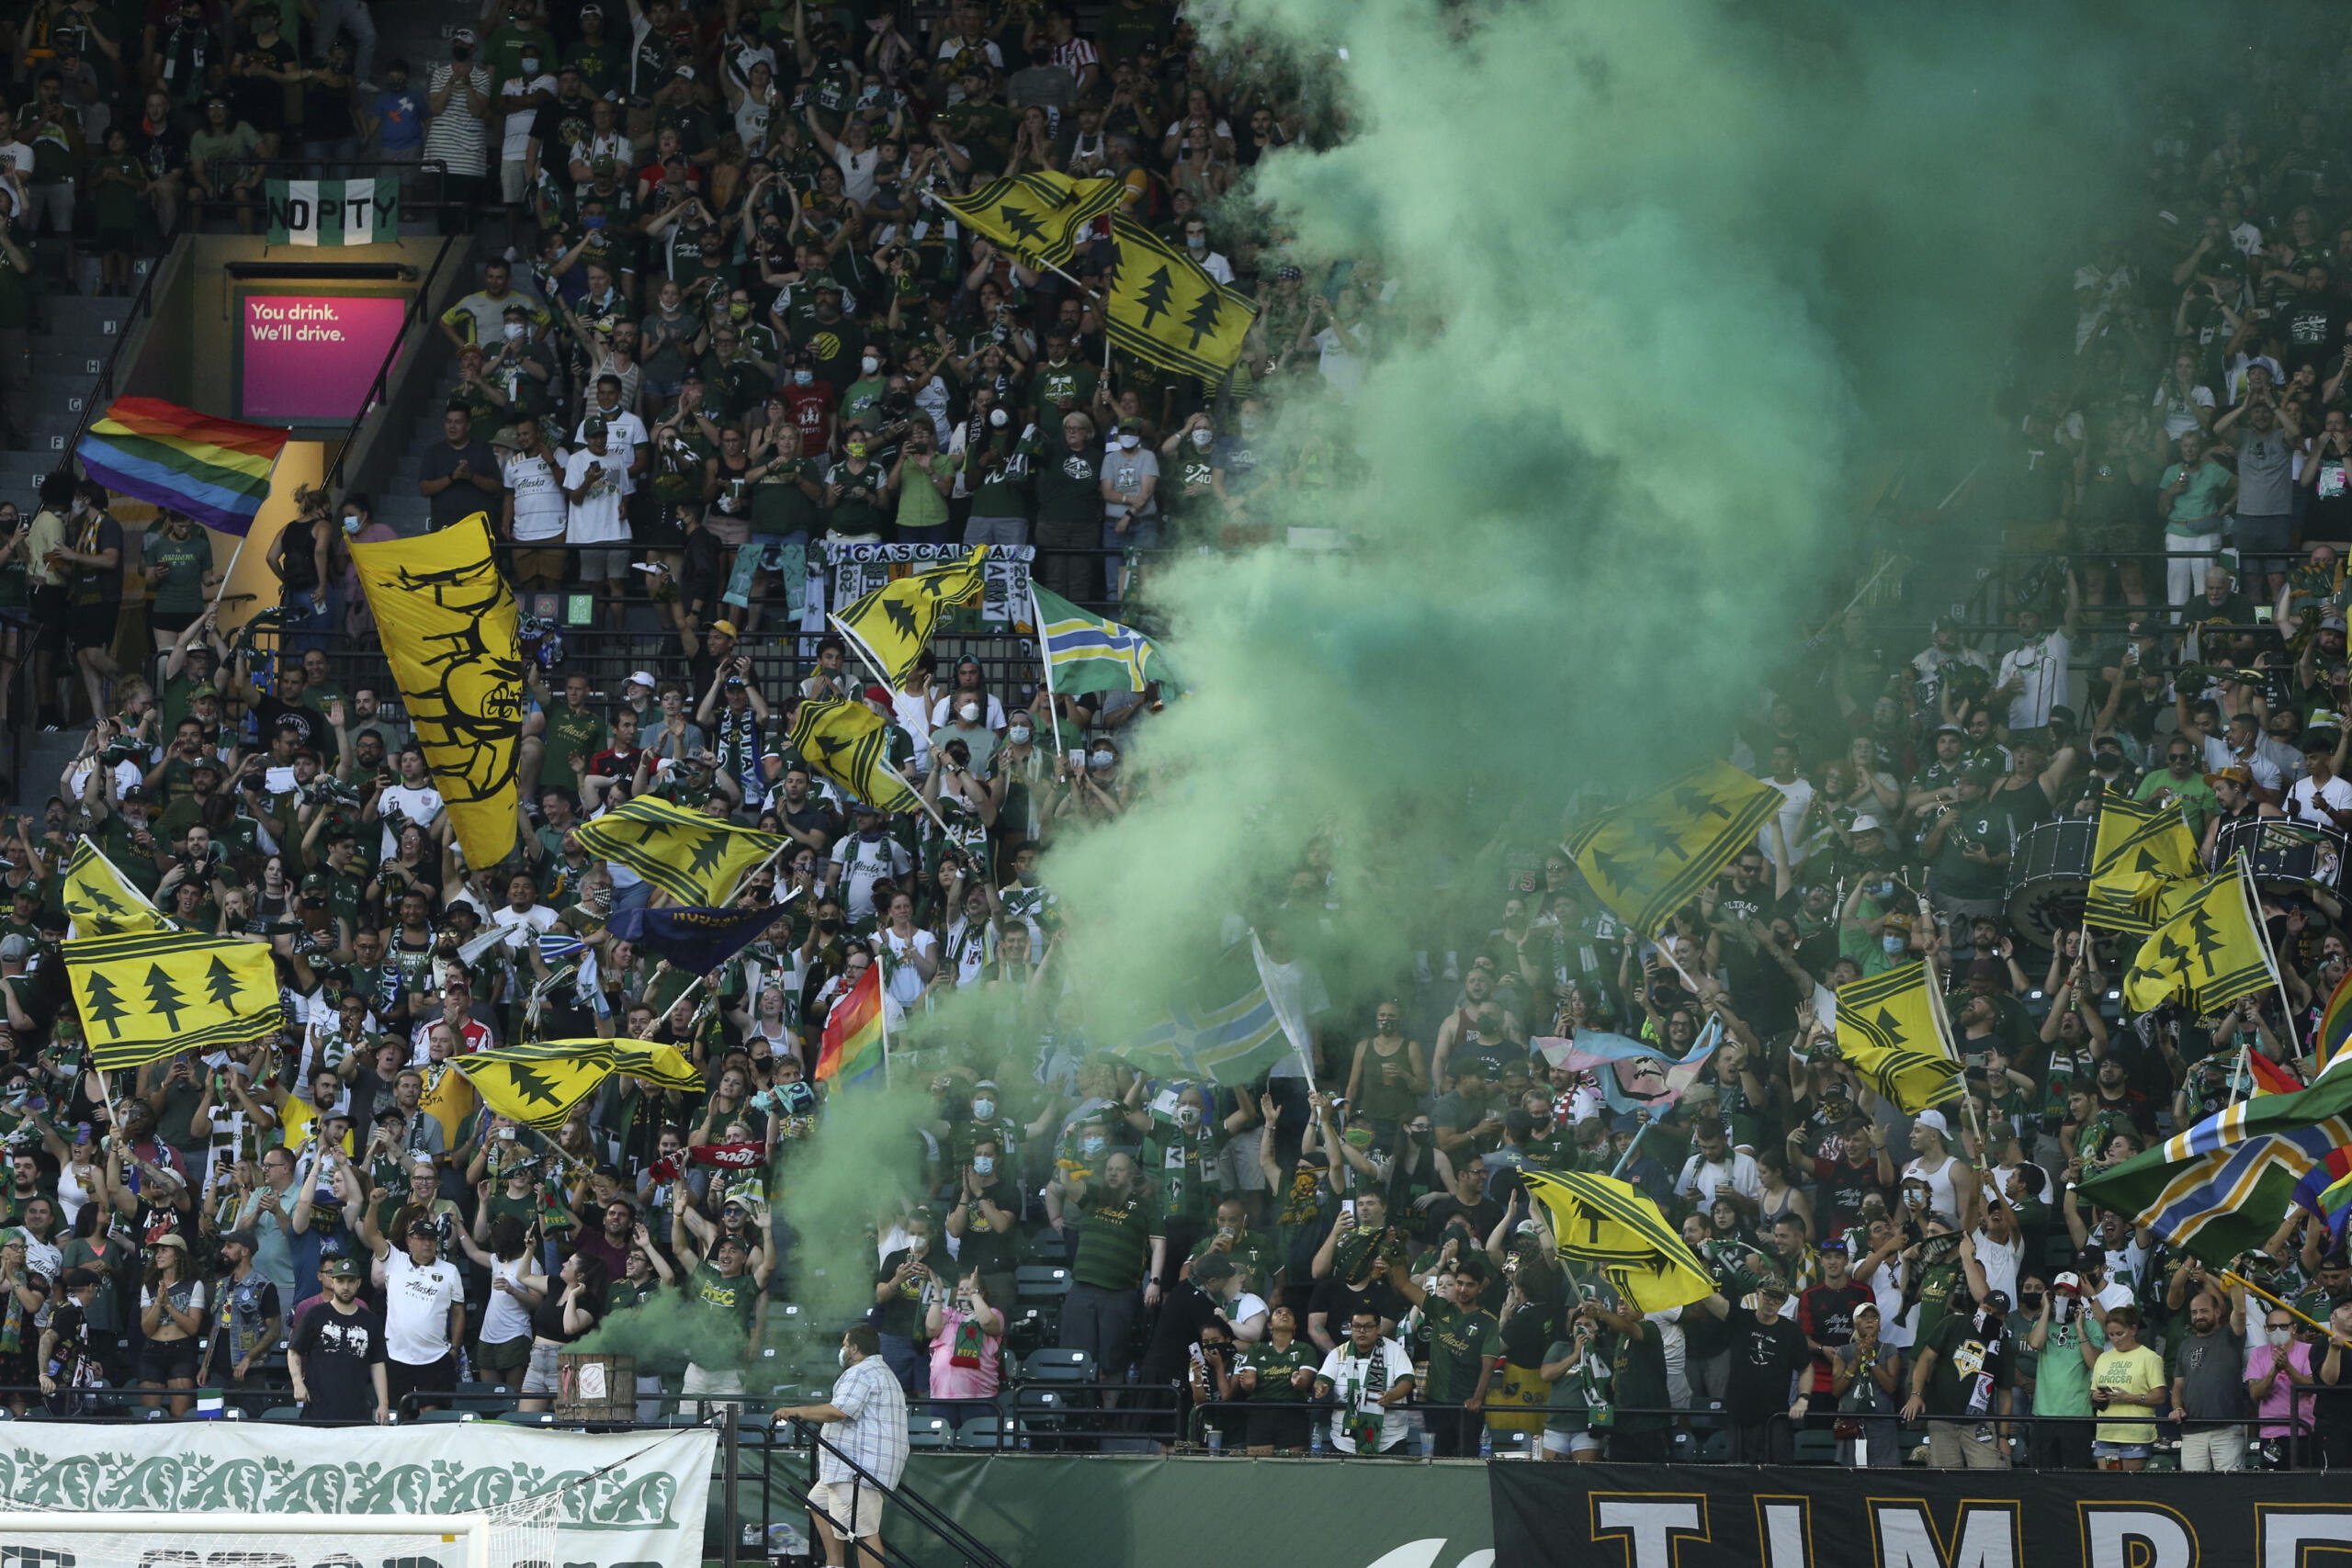 The Portland Timbers face the Seattle Sounders in an MLS match at Providence Park on Sunday, Aug. 15, 2021.